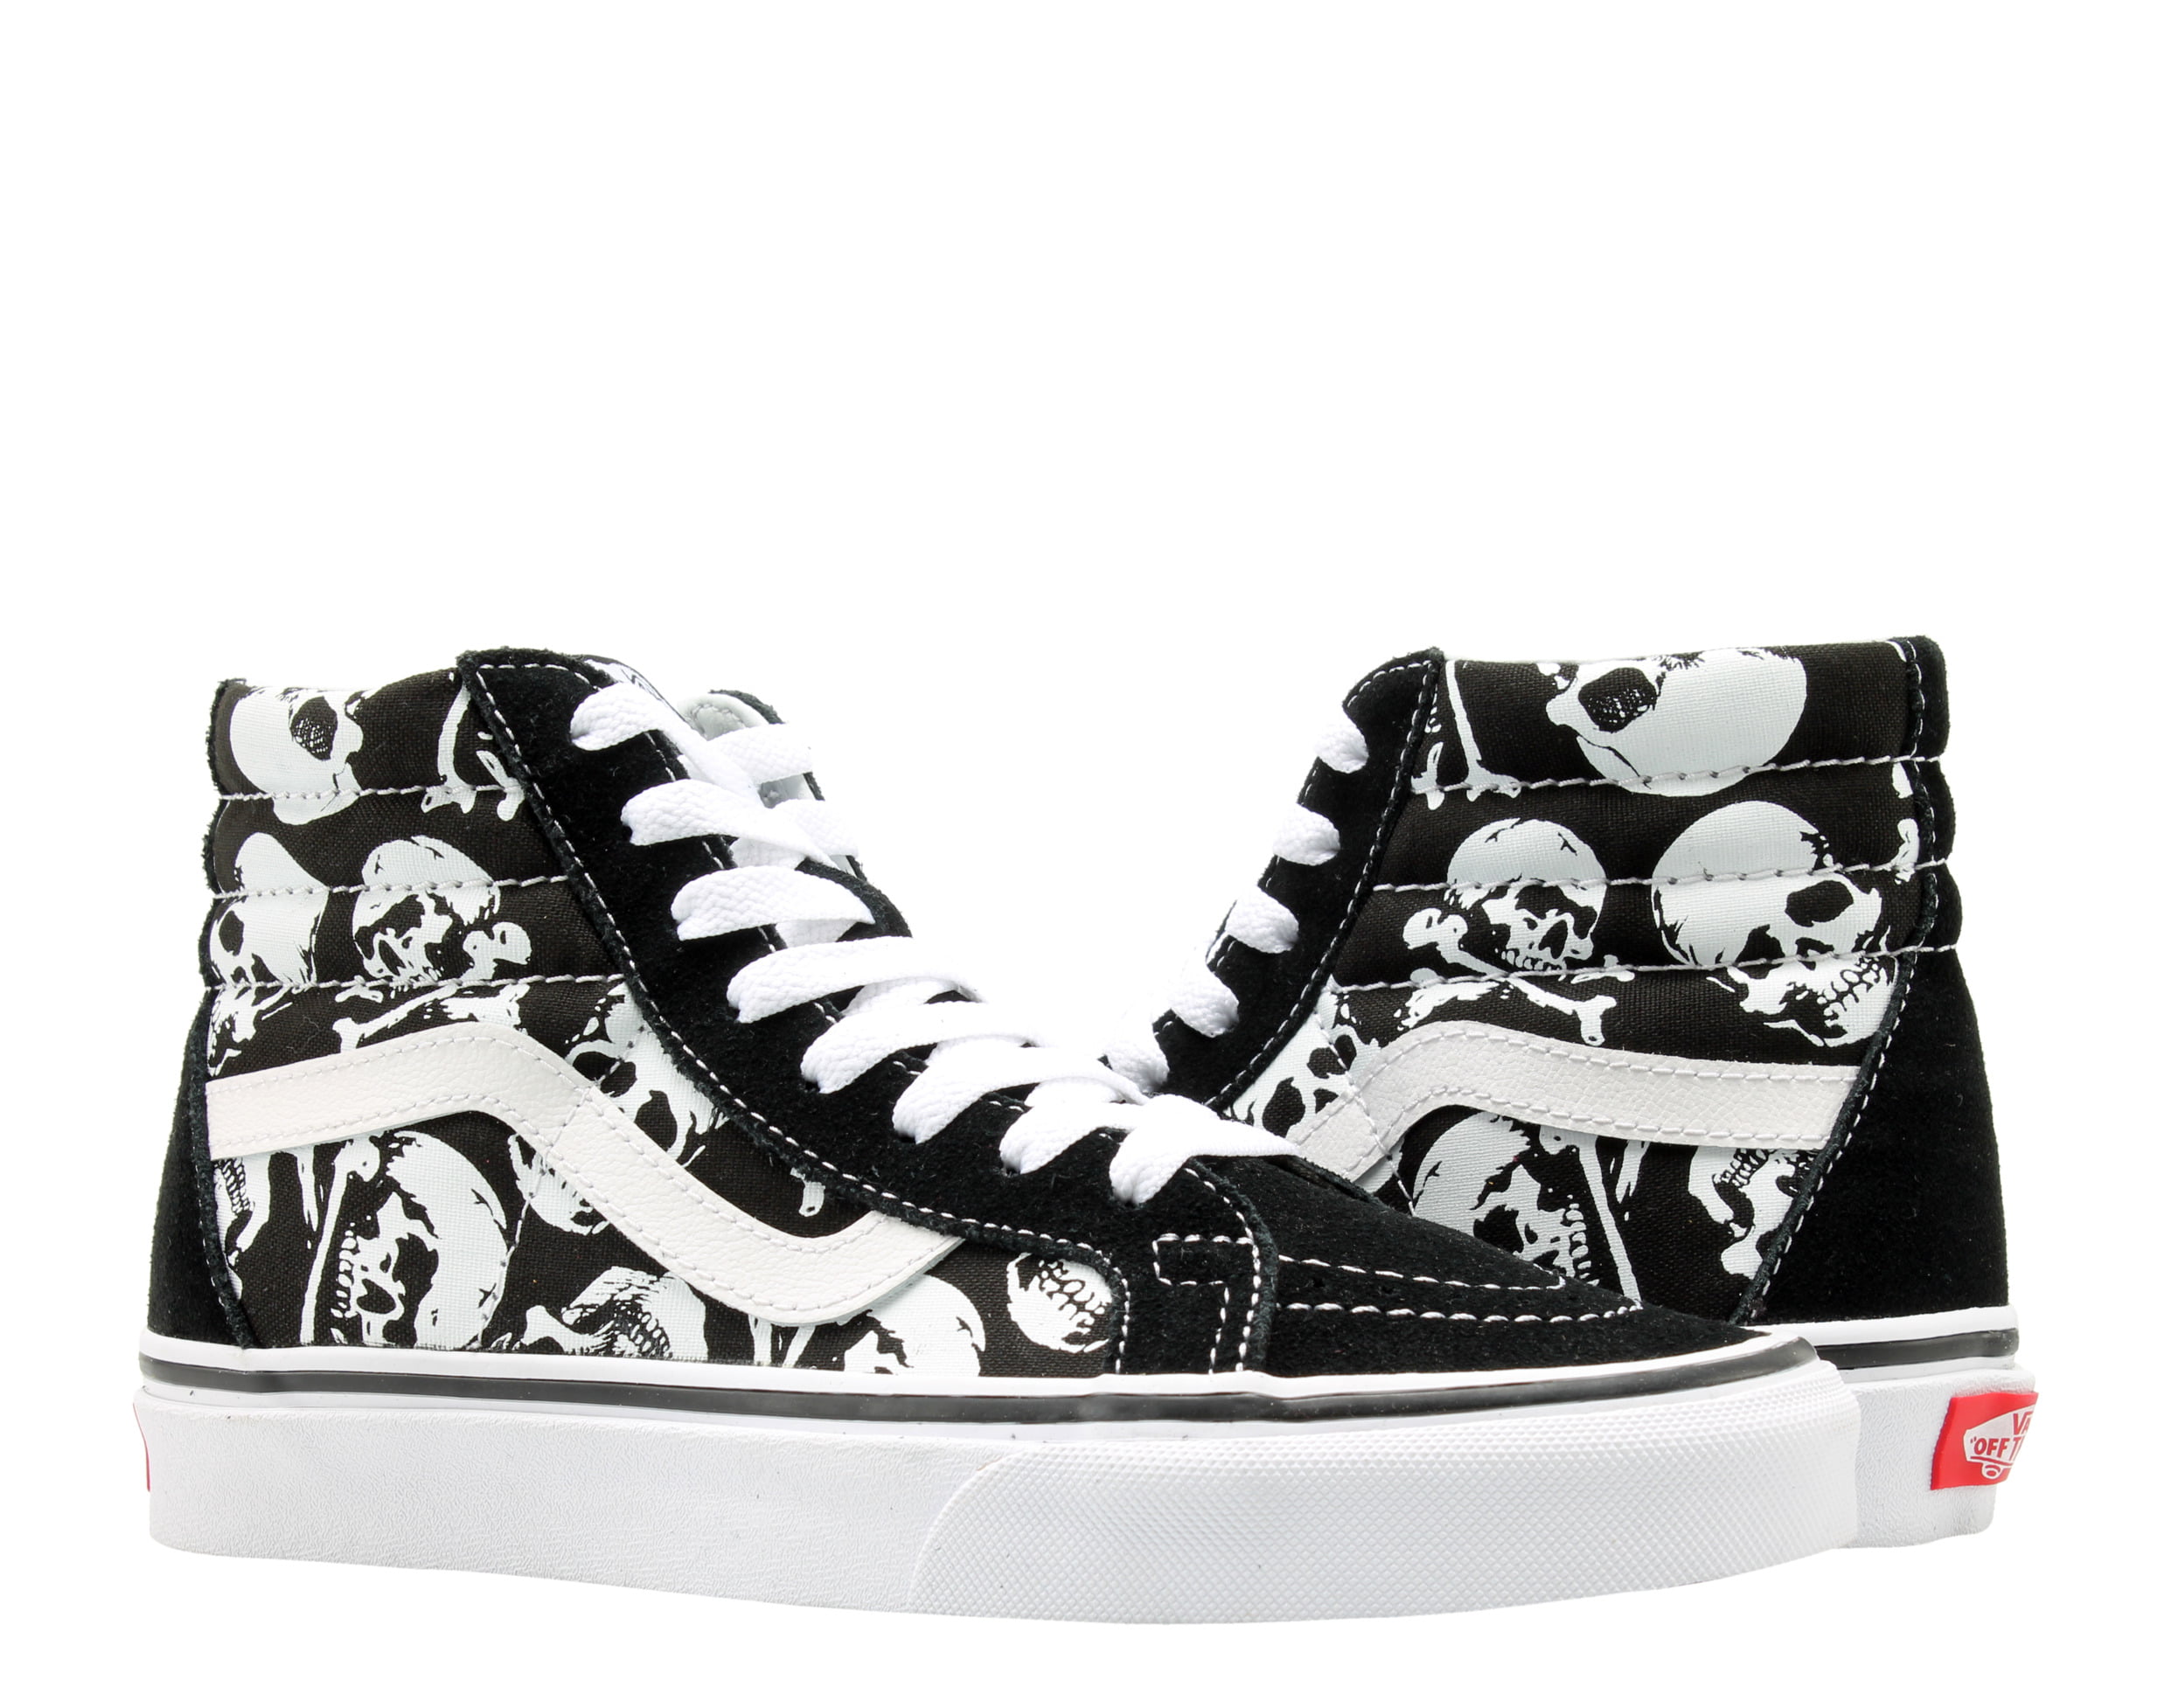 D-Story Custom Skull High Top Shoes for Men Canvas Shoes Fashion Sneaker